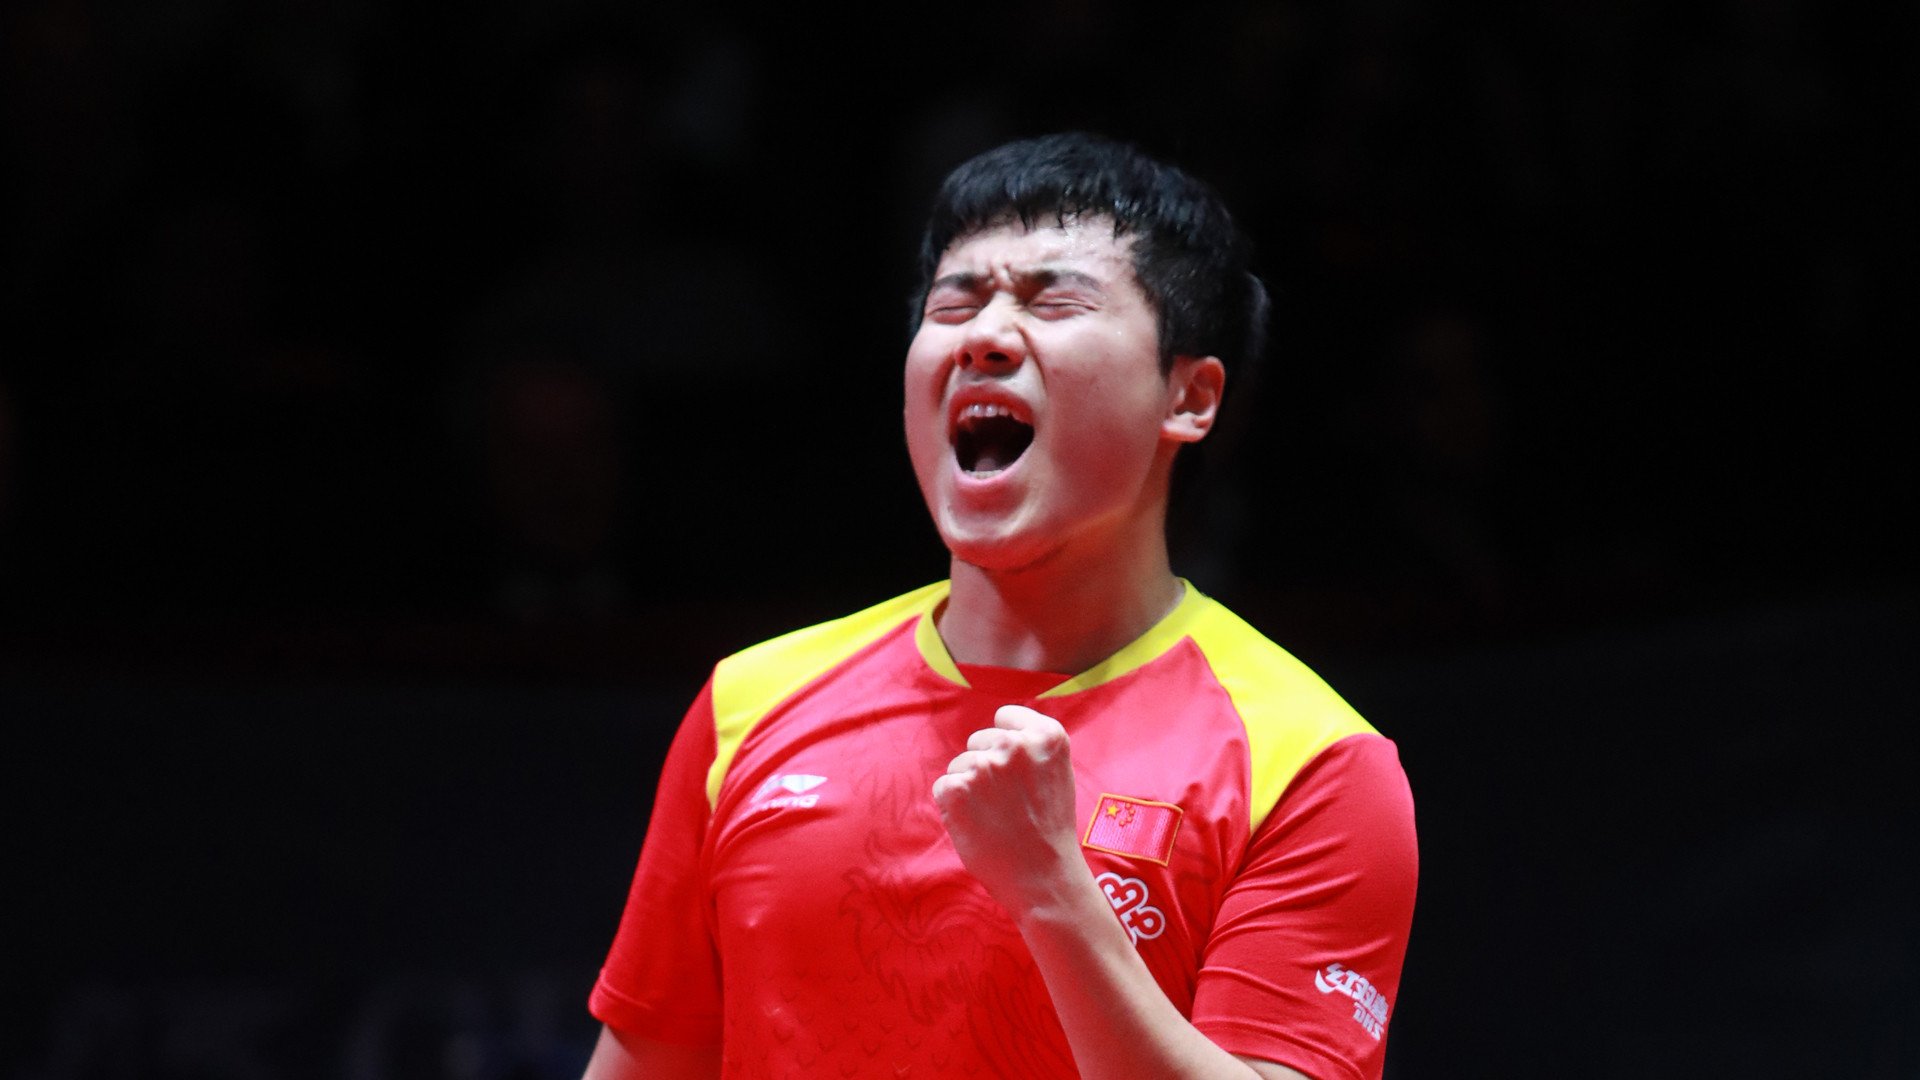 Chinese qualifier Liang beats second seed Xu to claim first ITTF World Tour title at Austrian Open